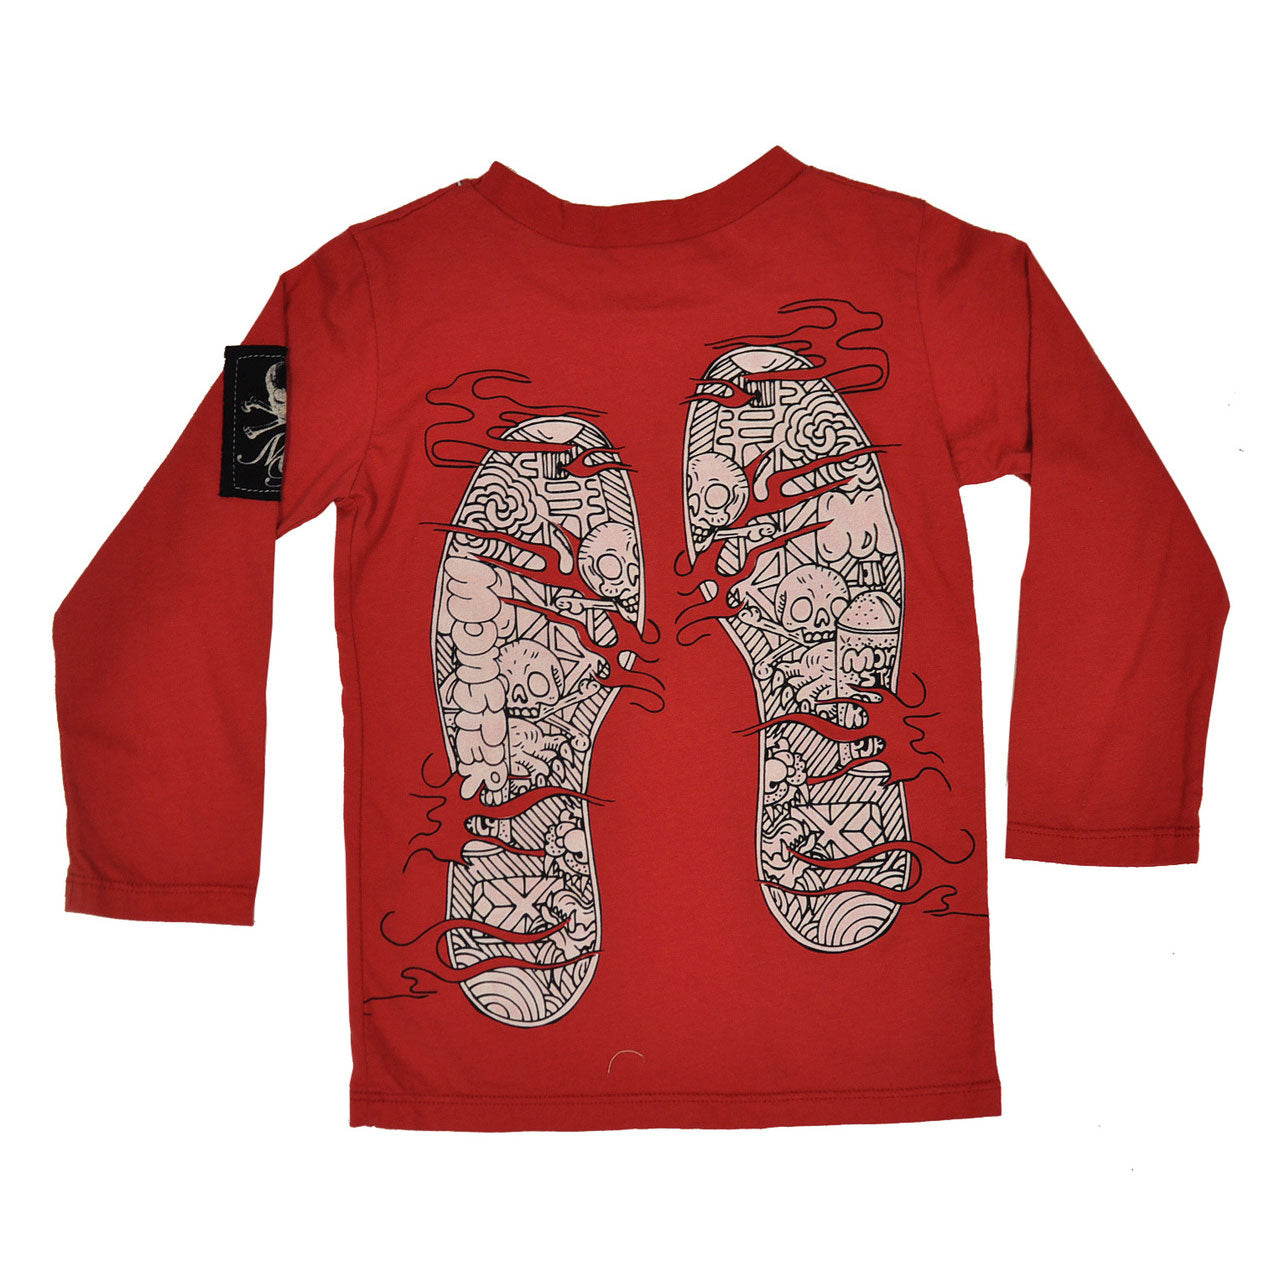 Boys' Chinese Sneaker Lion Shirt by Monster Republic